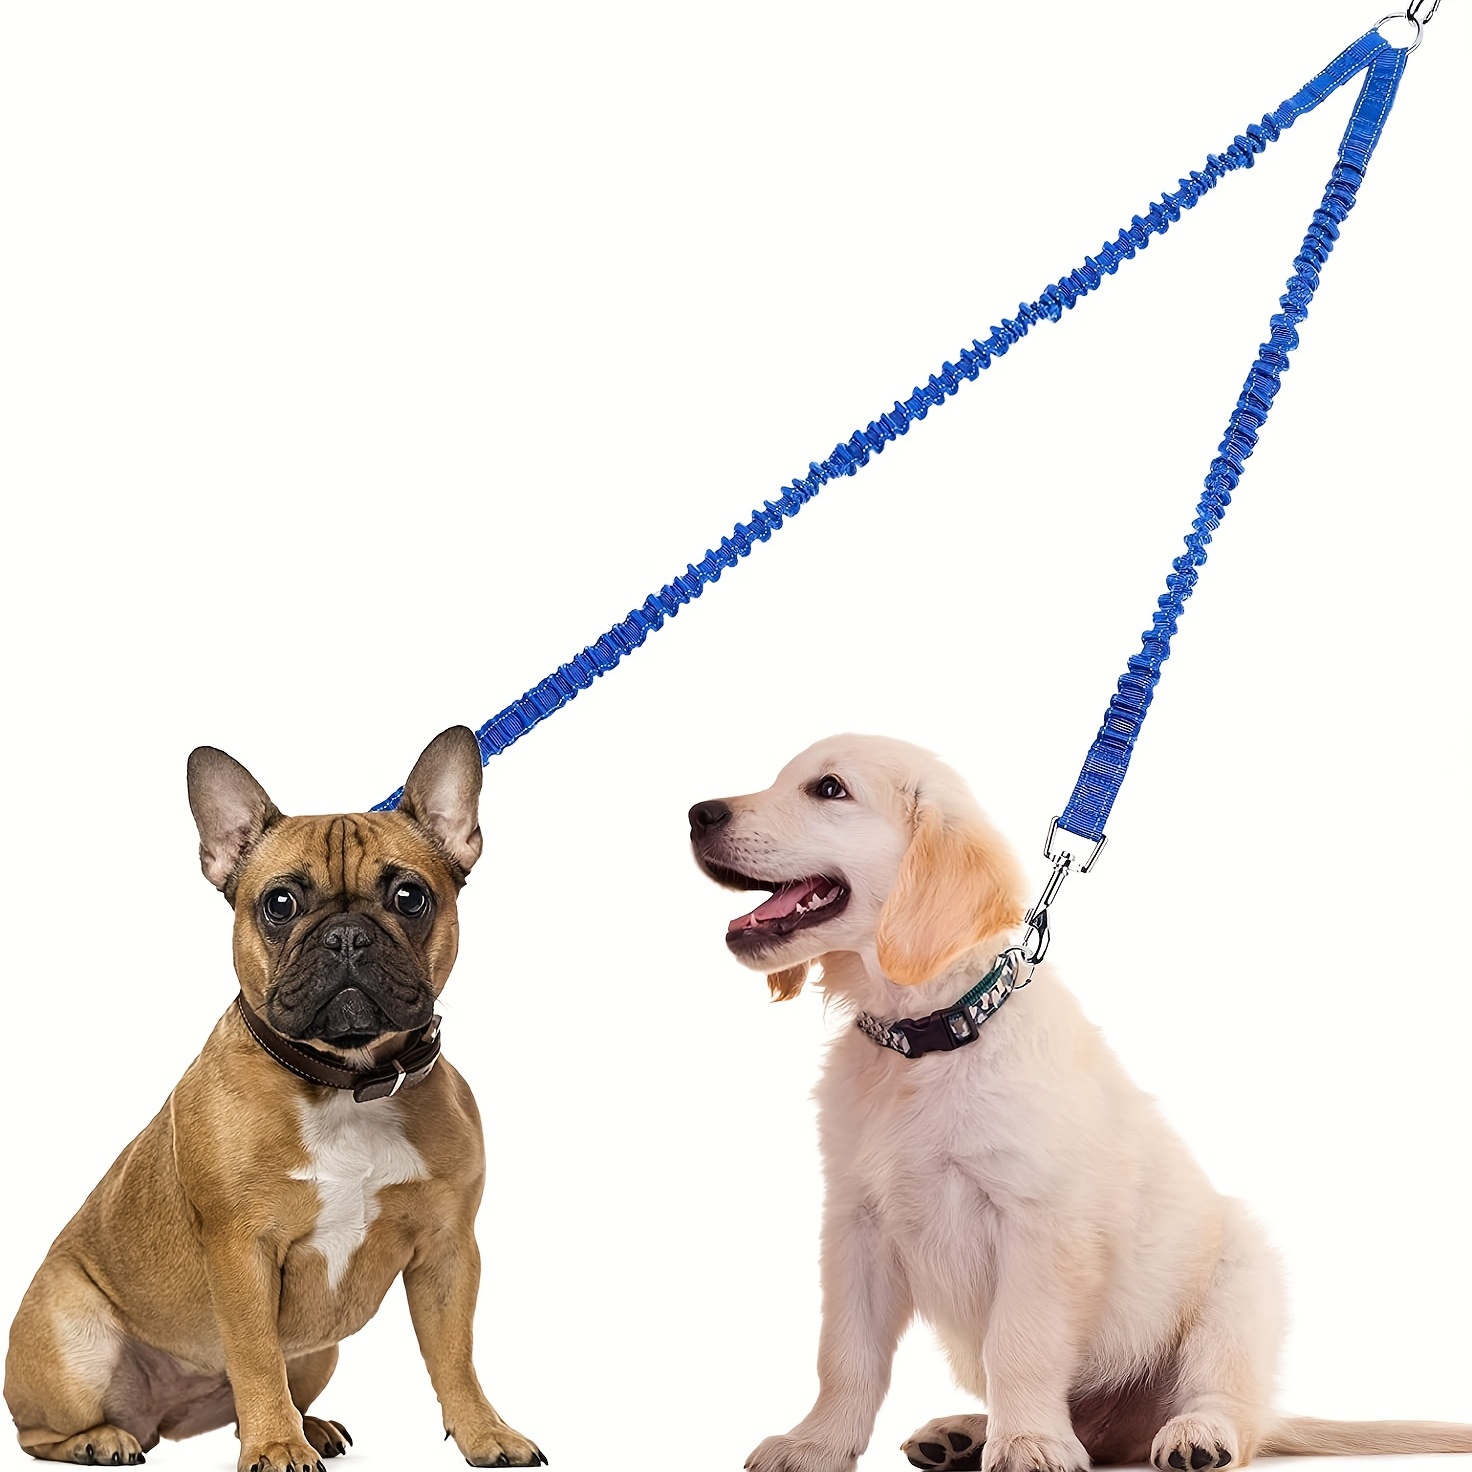 Heavy Duty Double Ended Bolt Snap Buckle for Dog Leash - Durable Metal Clip  for Secure Attachment